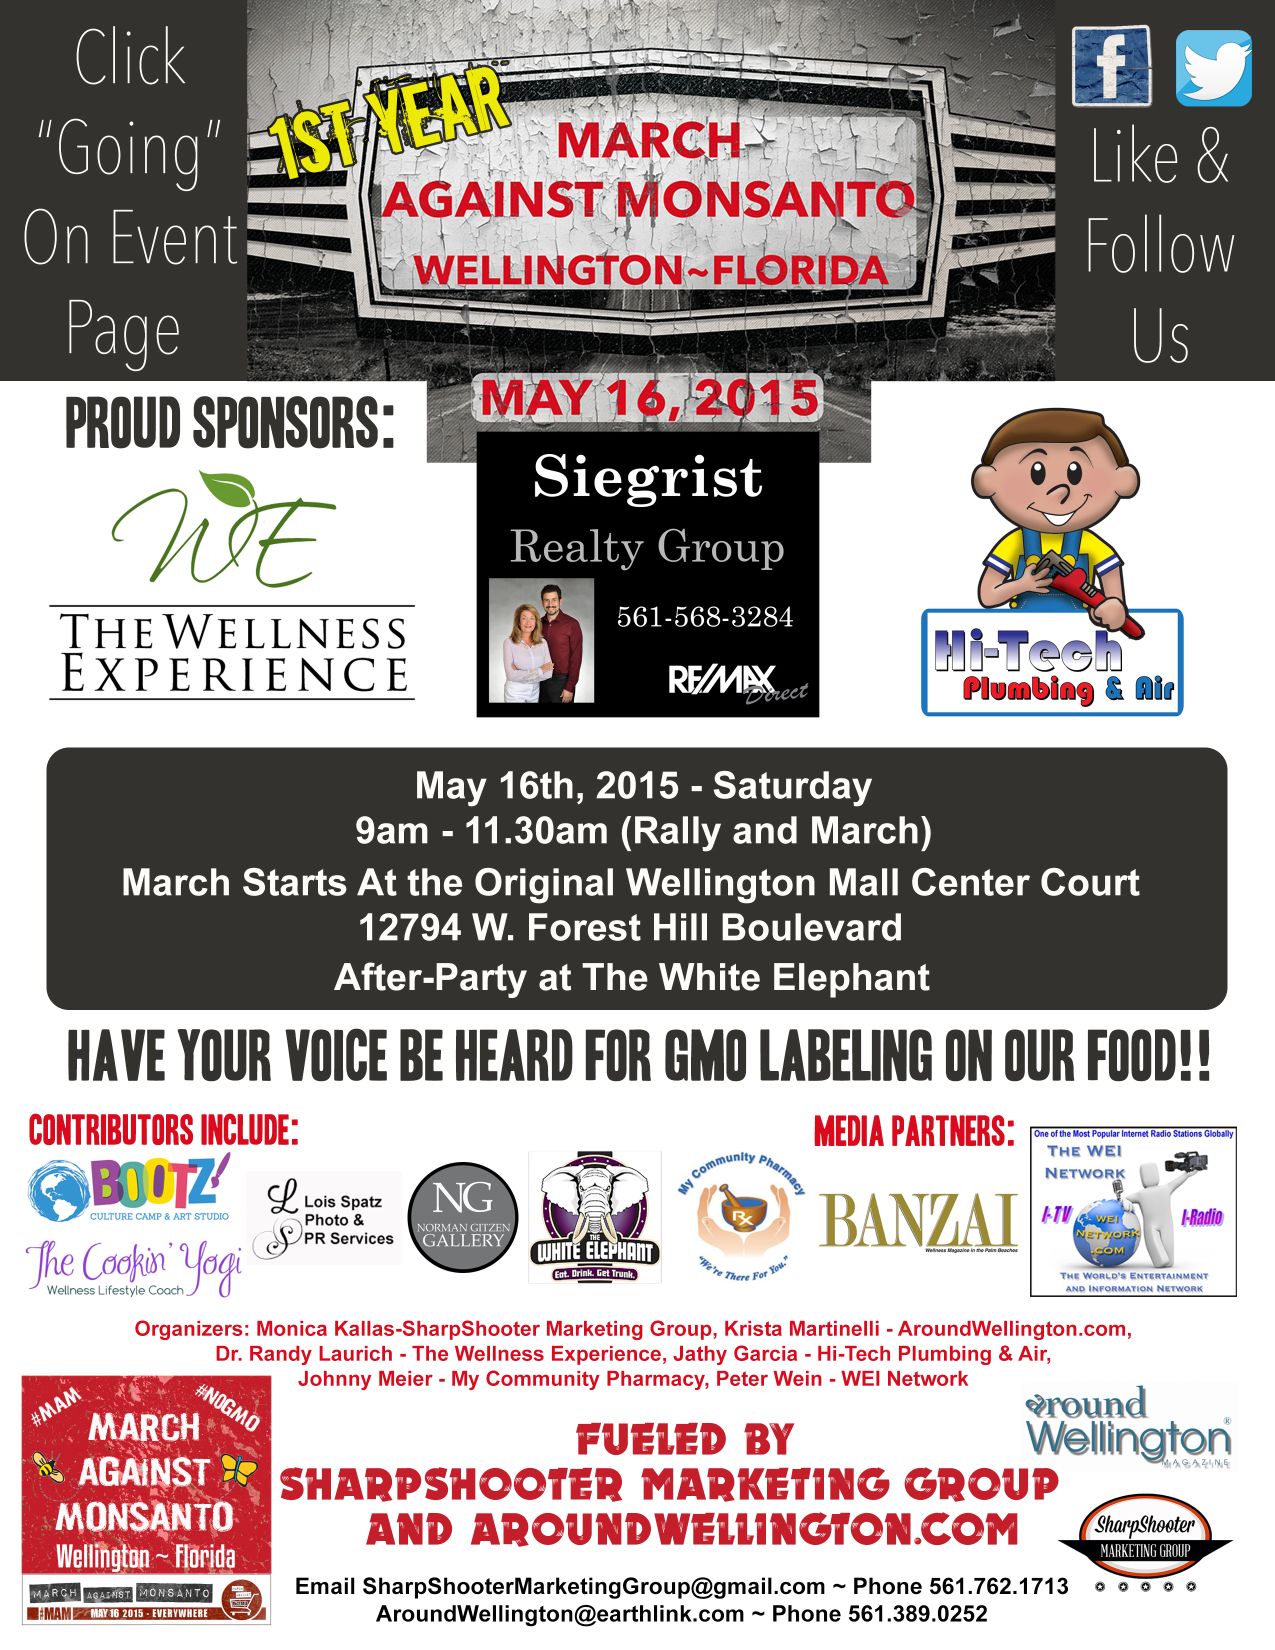 May, 2015 – March Against Monsanto in Wellington, FL